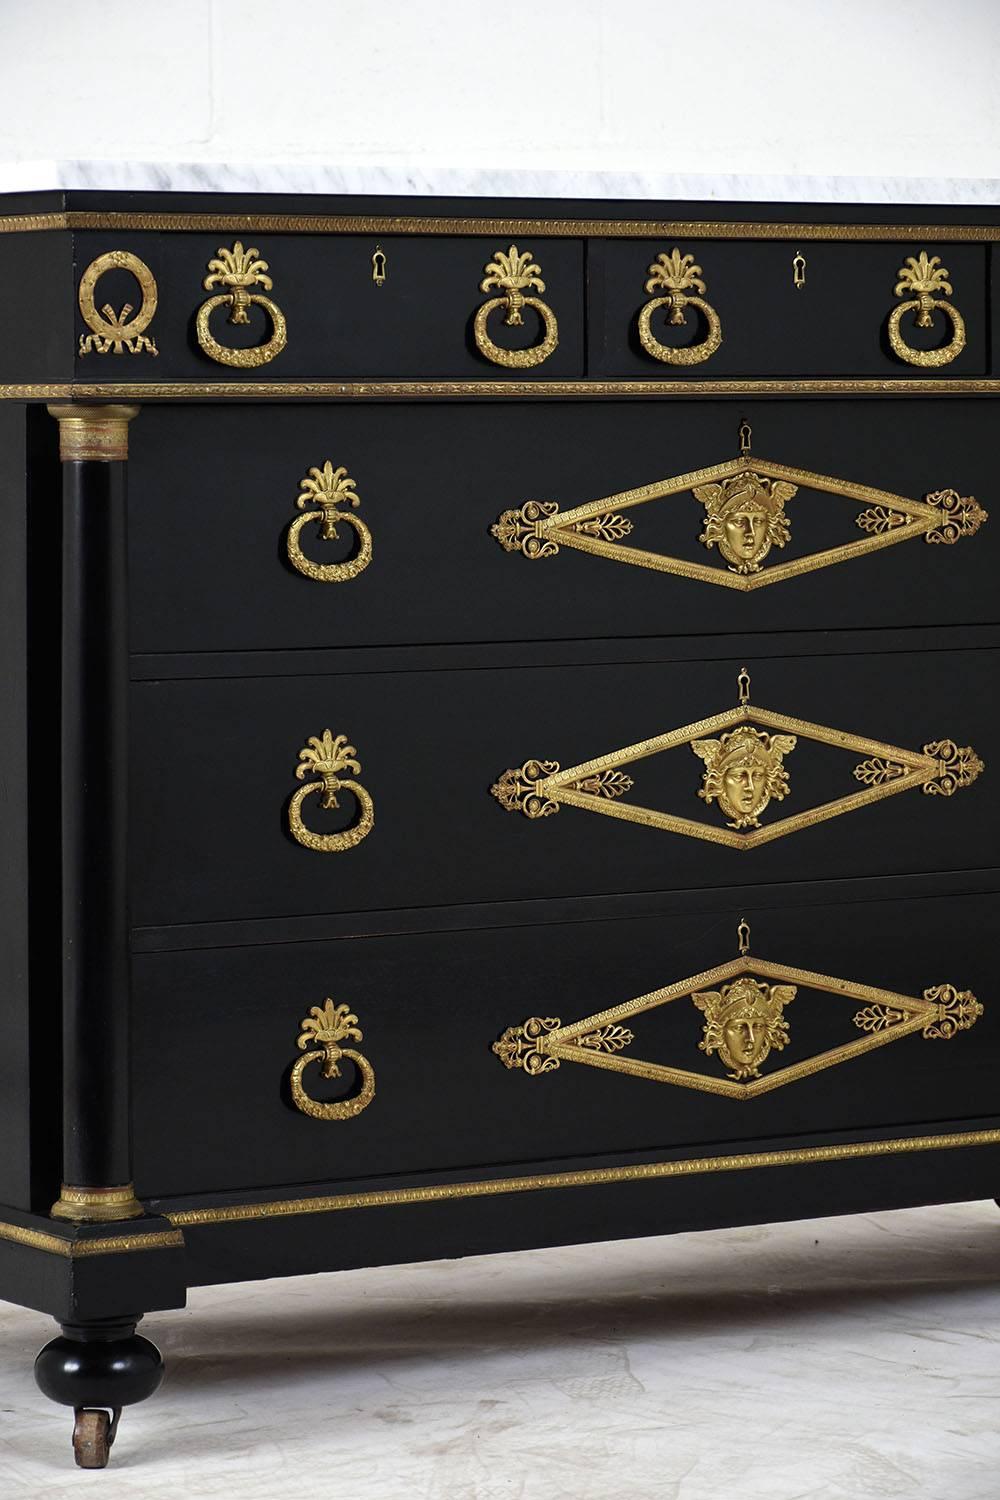 20th Century French Empire-Style Chest of Drawers, circa 1900